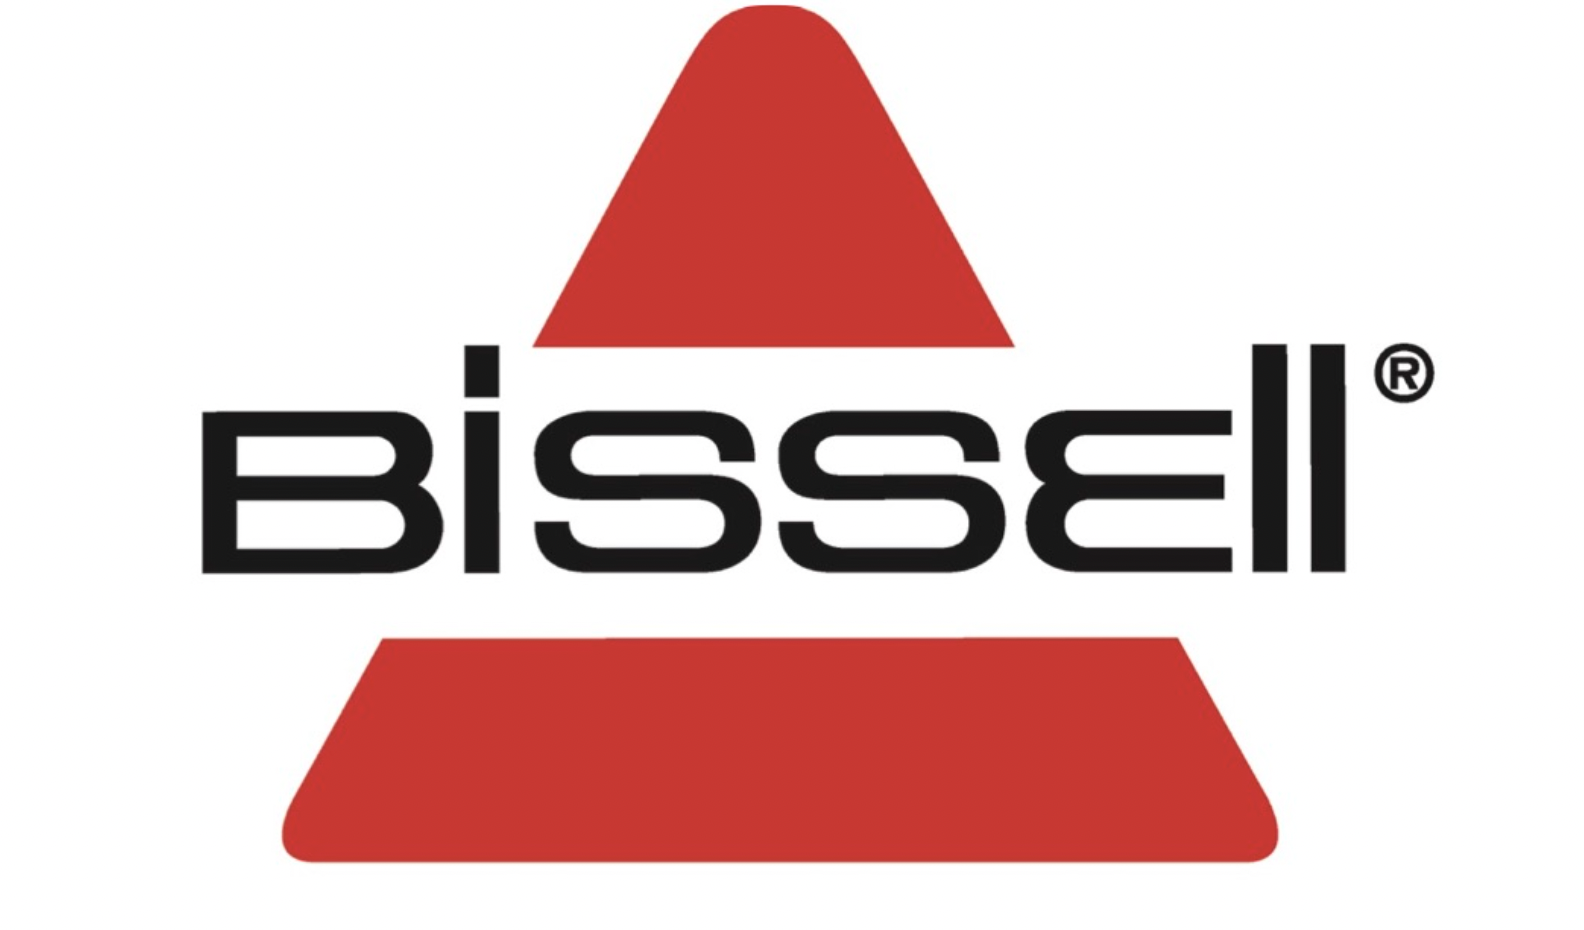 Bissell Robot Vacuums - Cleaning Redefined 